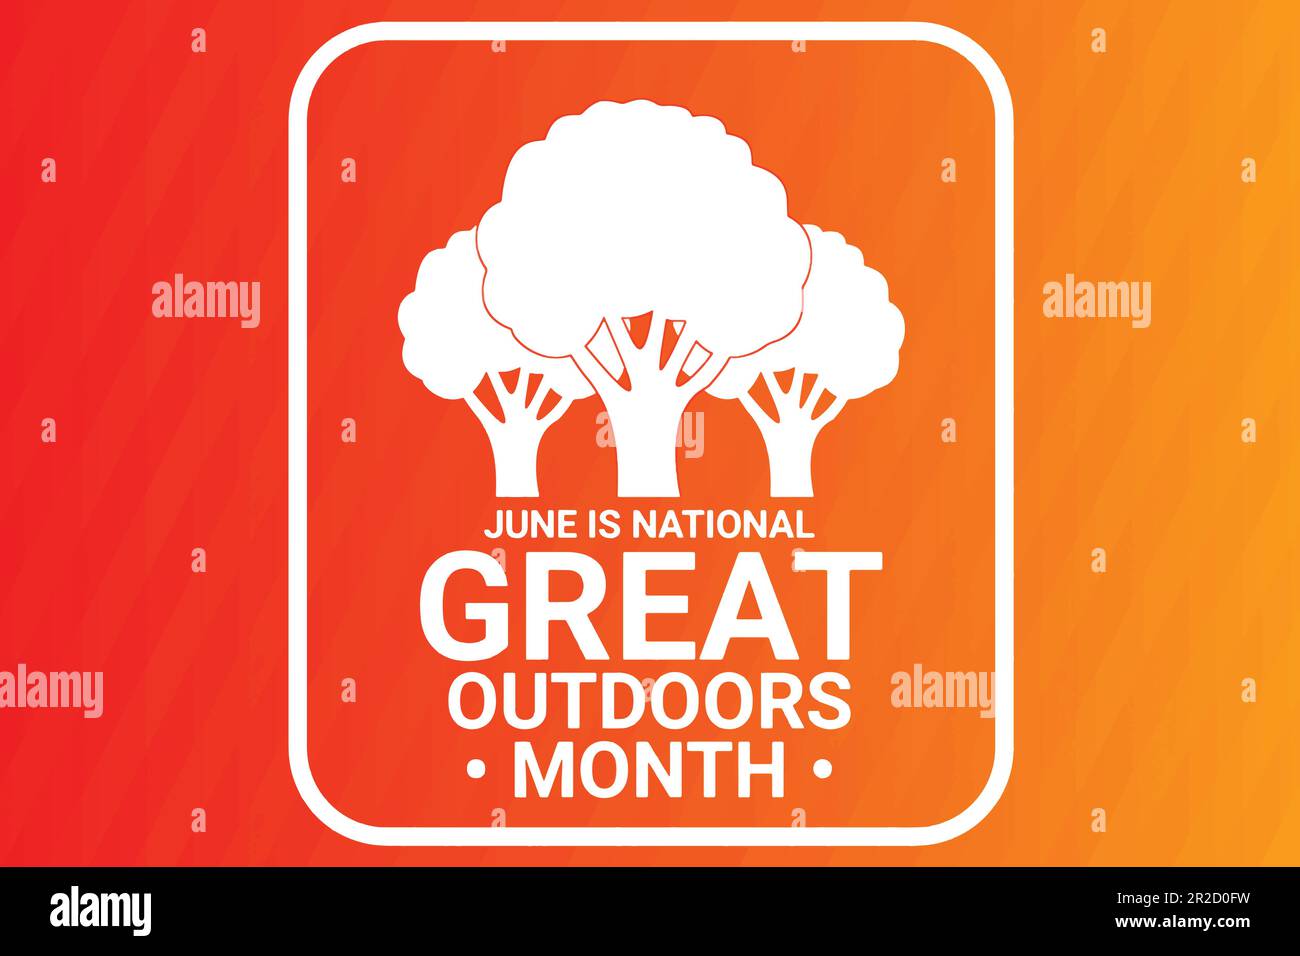 June Is National Great Outdoors Month. Holiday concept. Template for background, banner, card, poster with text inscription. Vector illustration Stock Vector